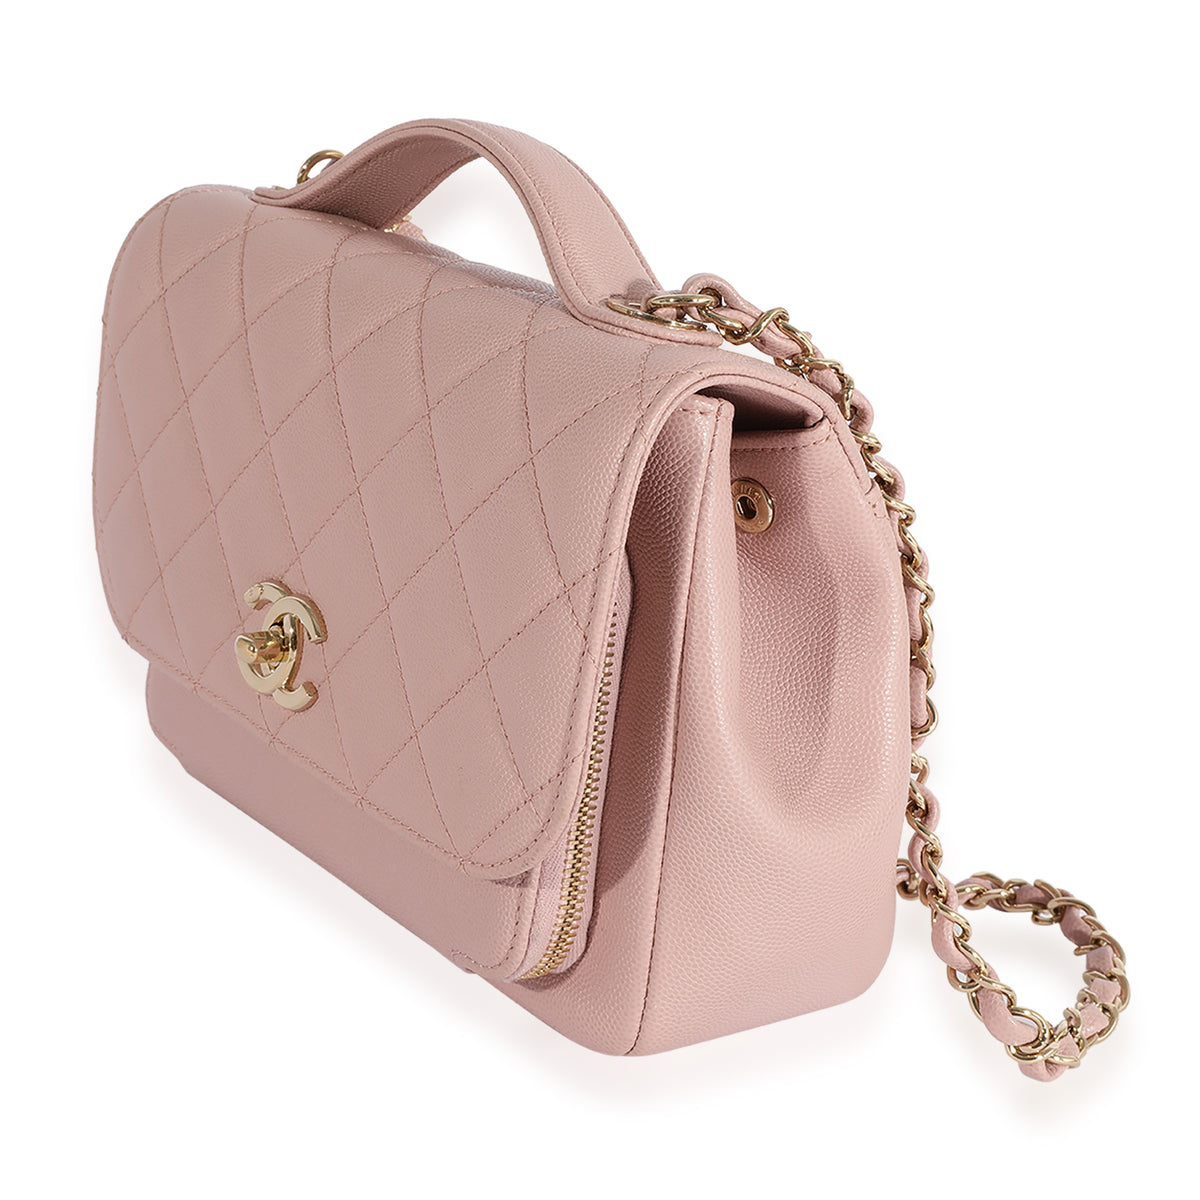 Chanel Small Business Affinity Flap Bag - Pink Crossbody Bags